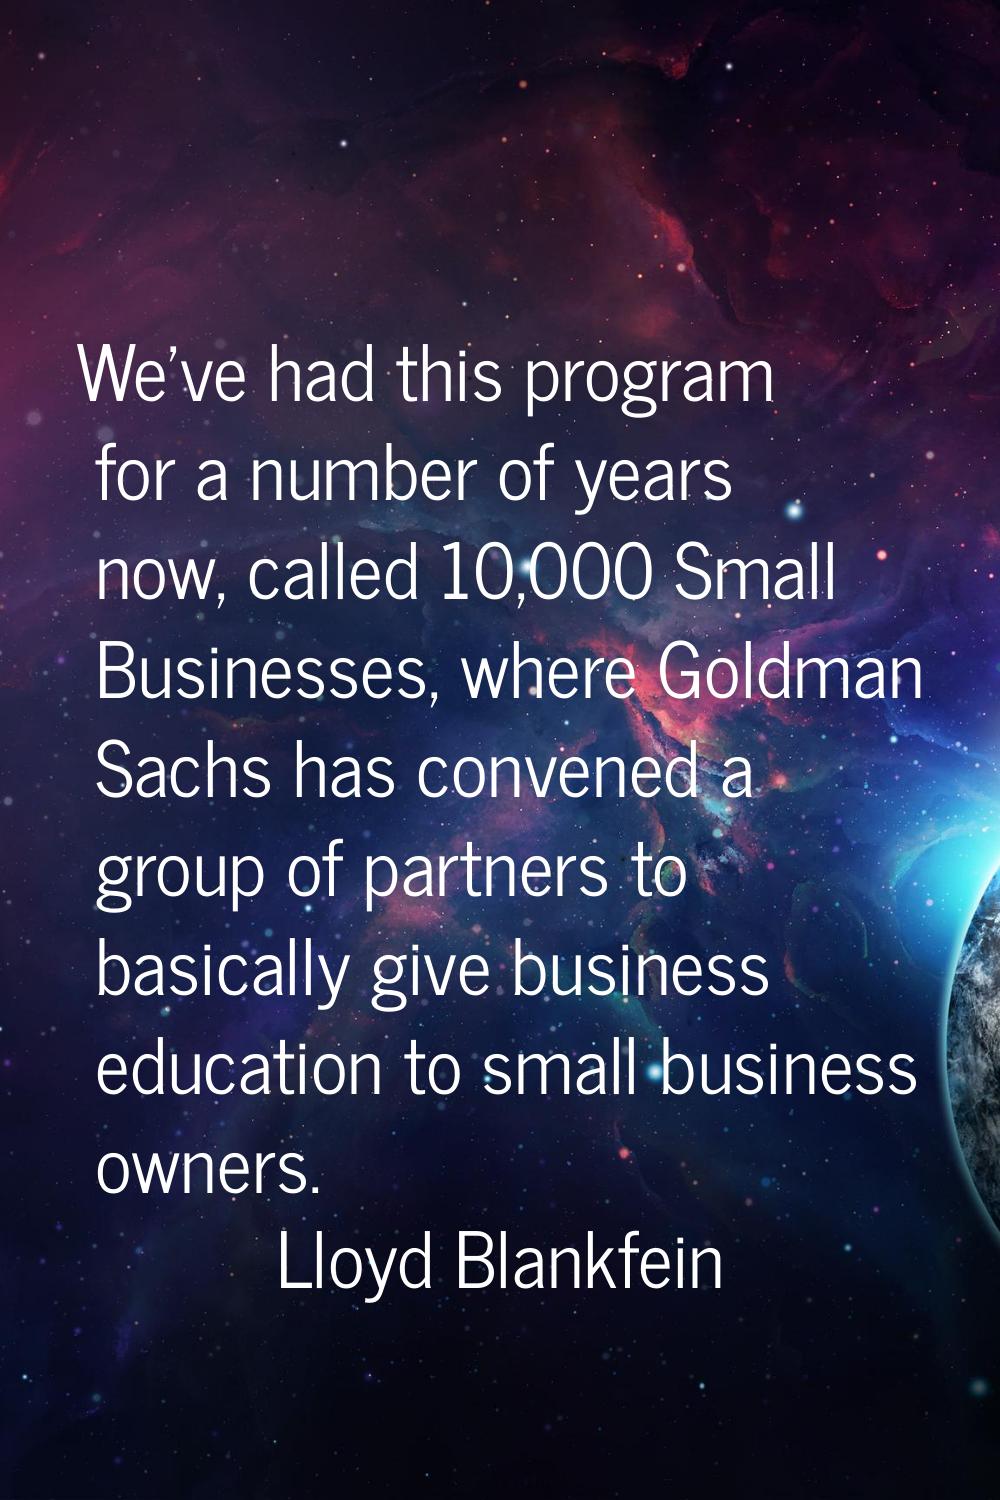 We've had this program for a number of years now, called 10,000 Small Businesses, where Goldman Sac